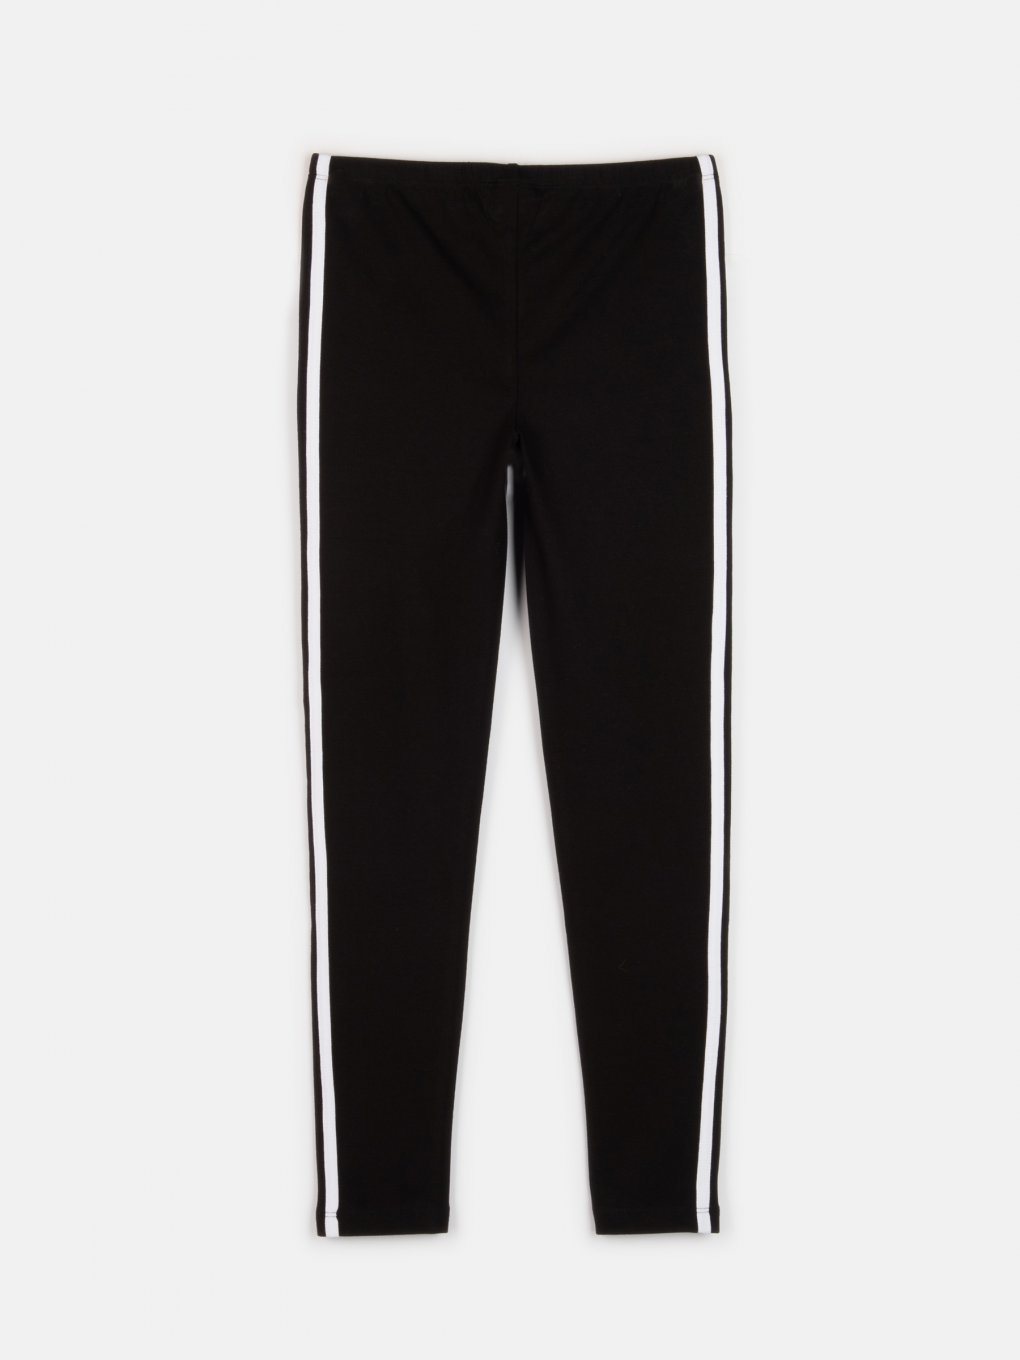 Cotton leggings with side stripes